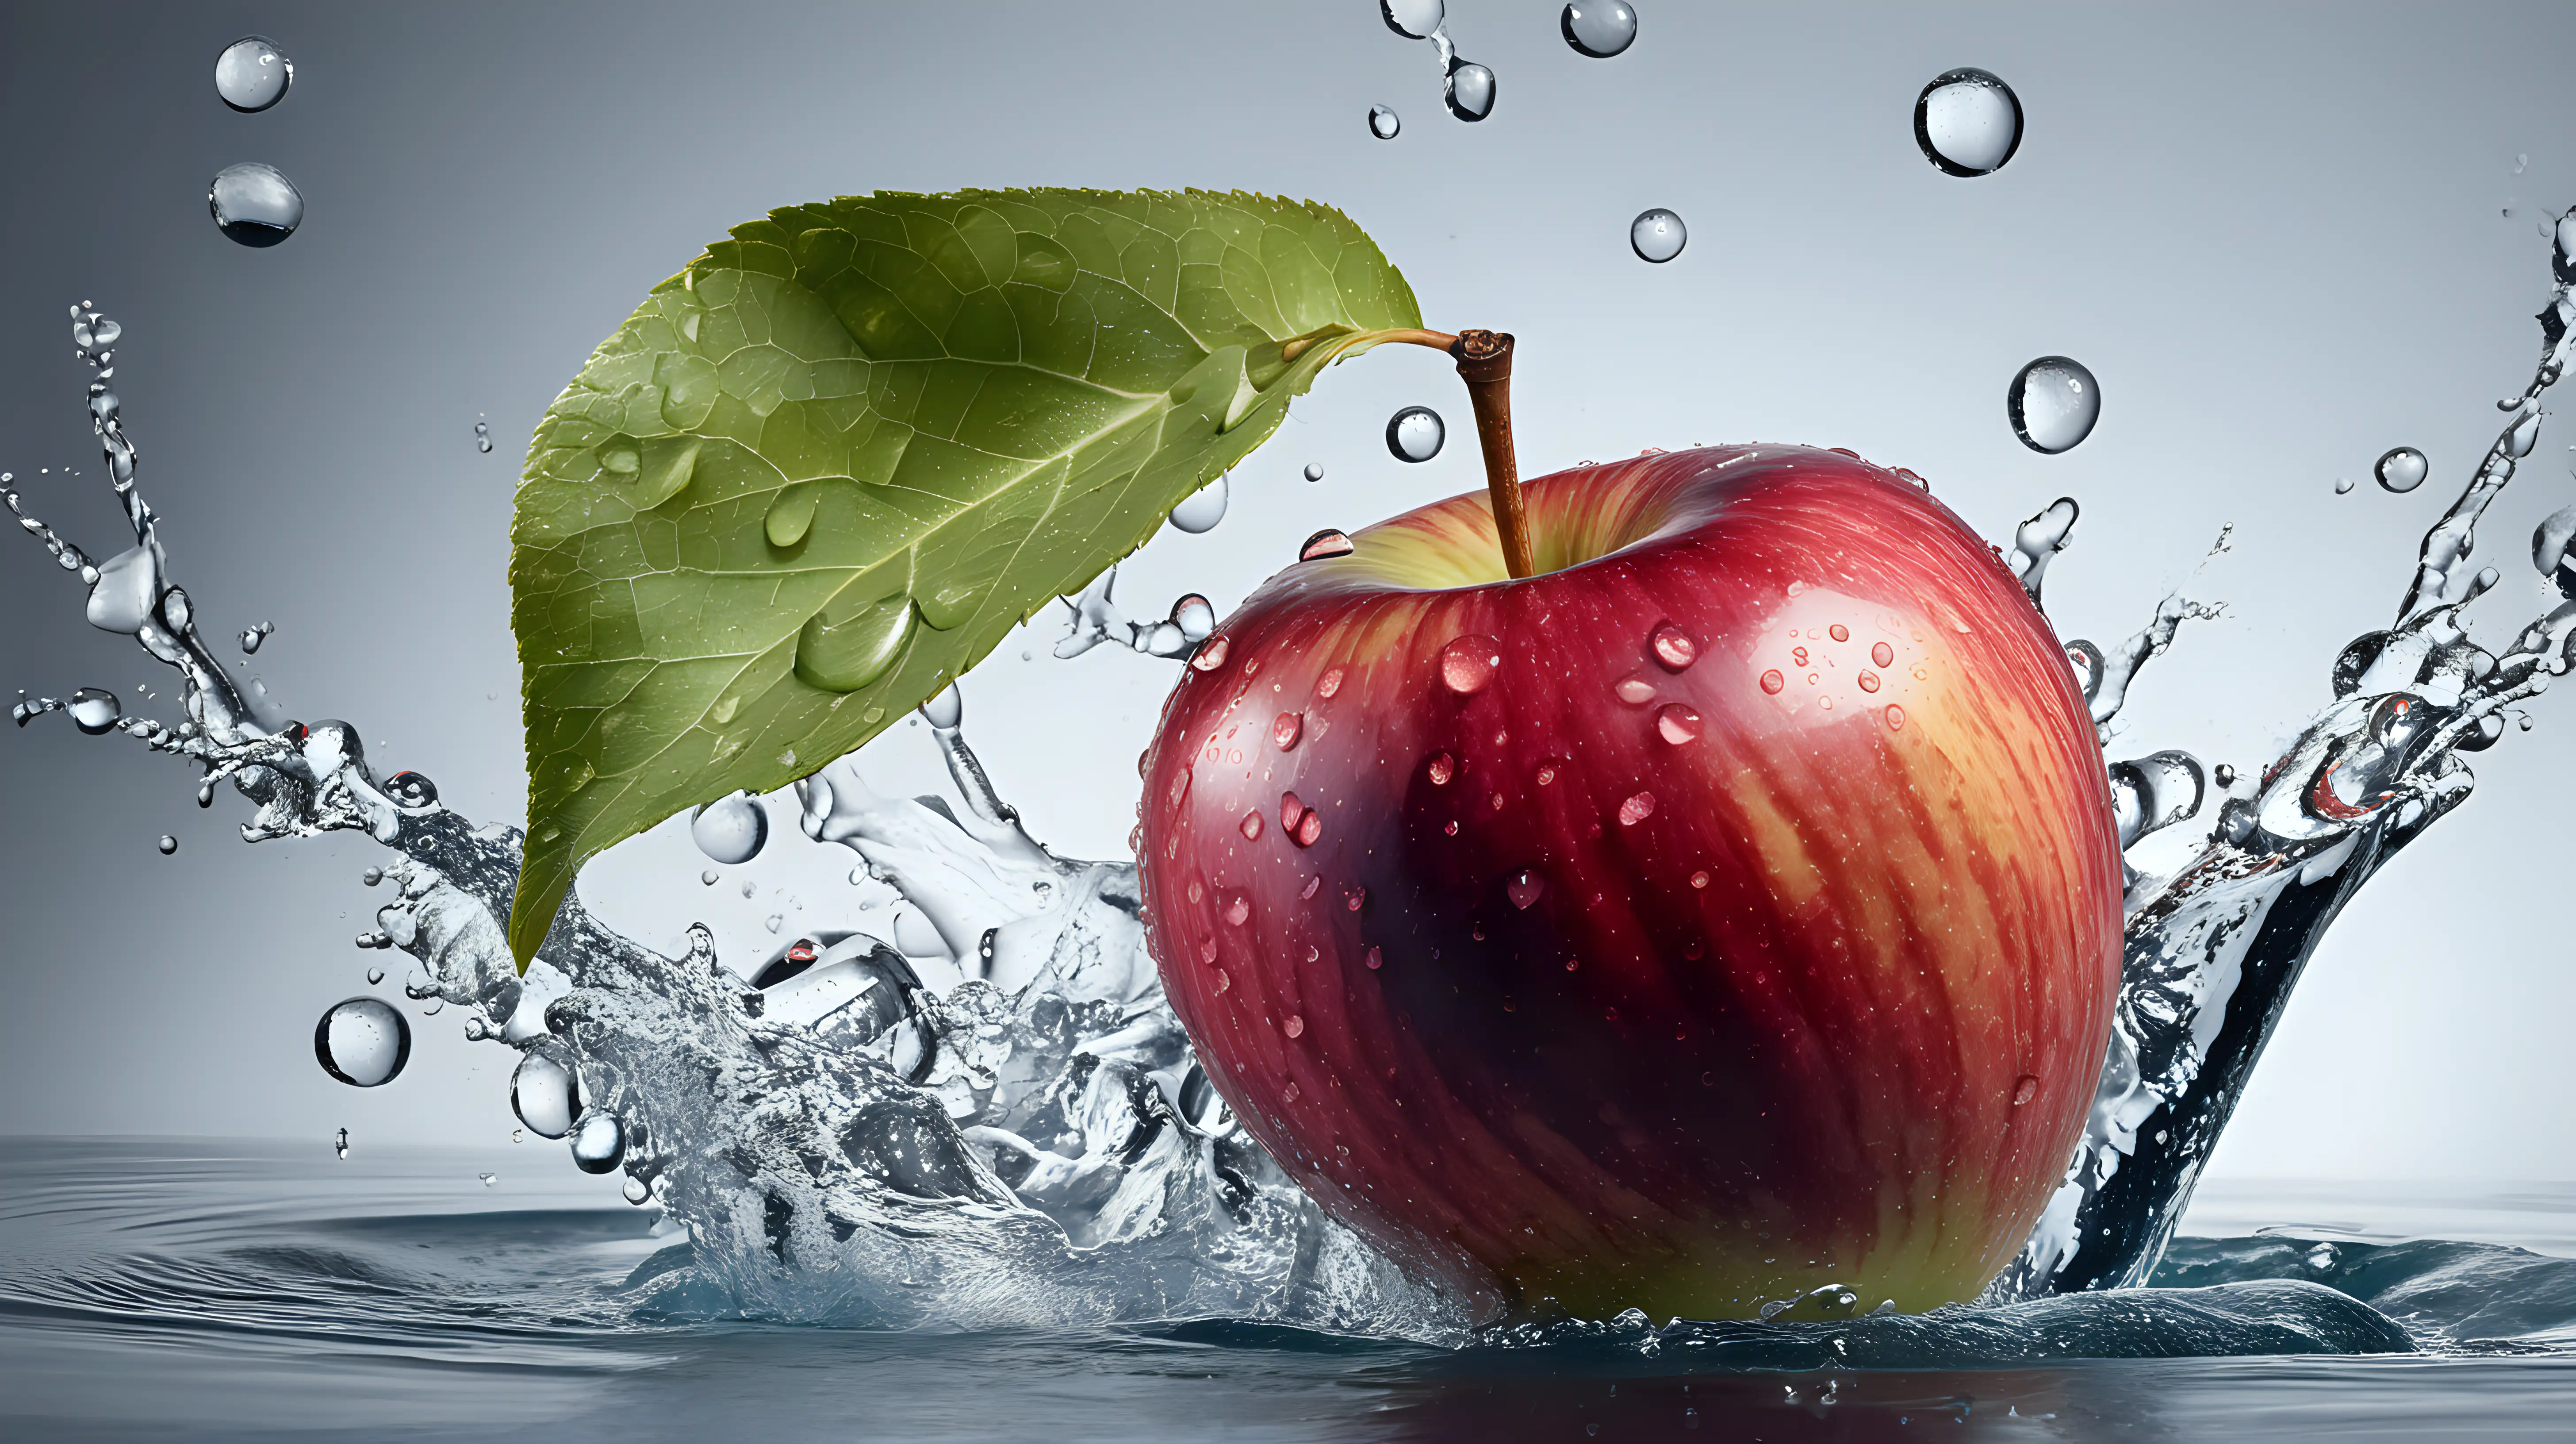 Dynamic Composition Single Apple with Tilted Angle and Water Droplets